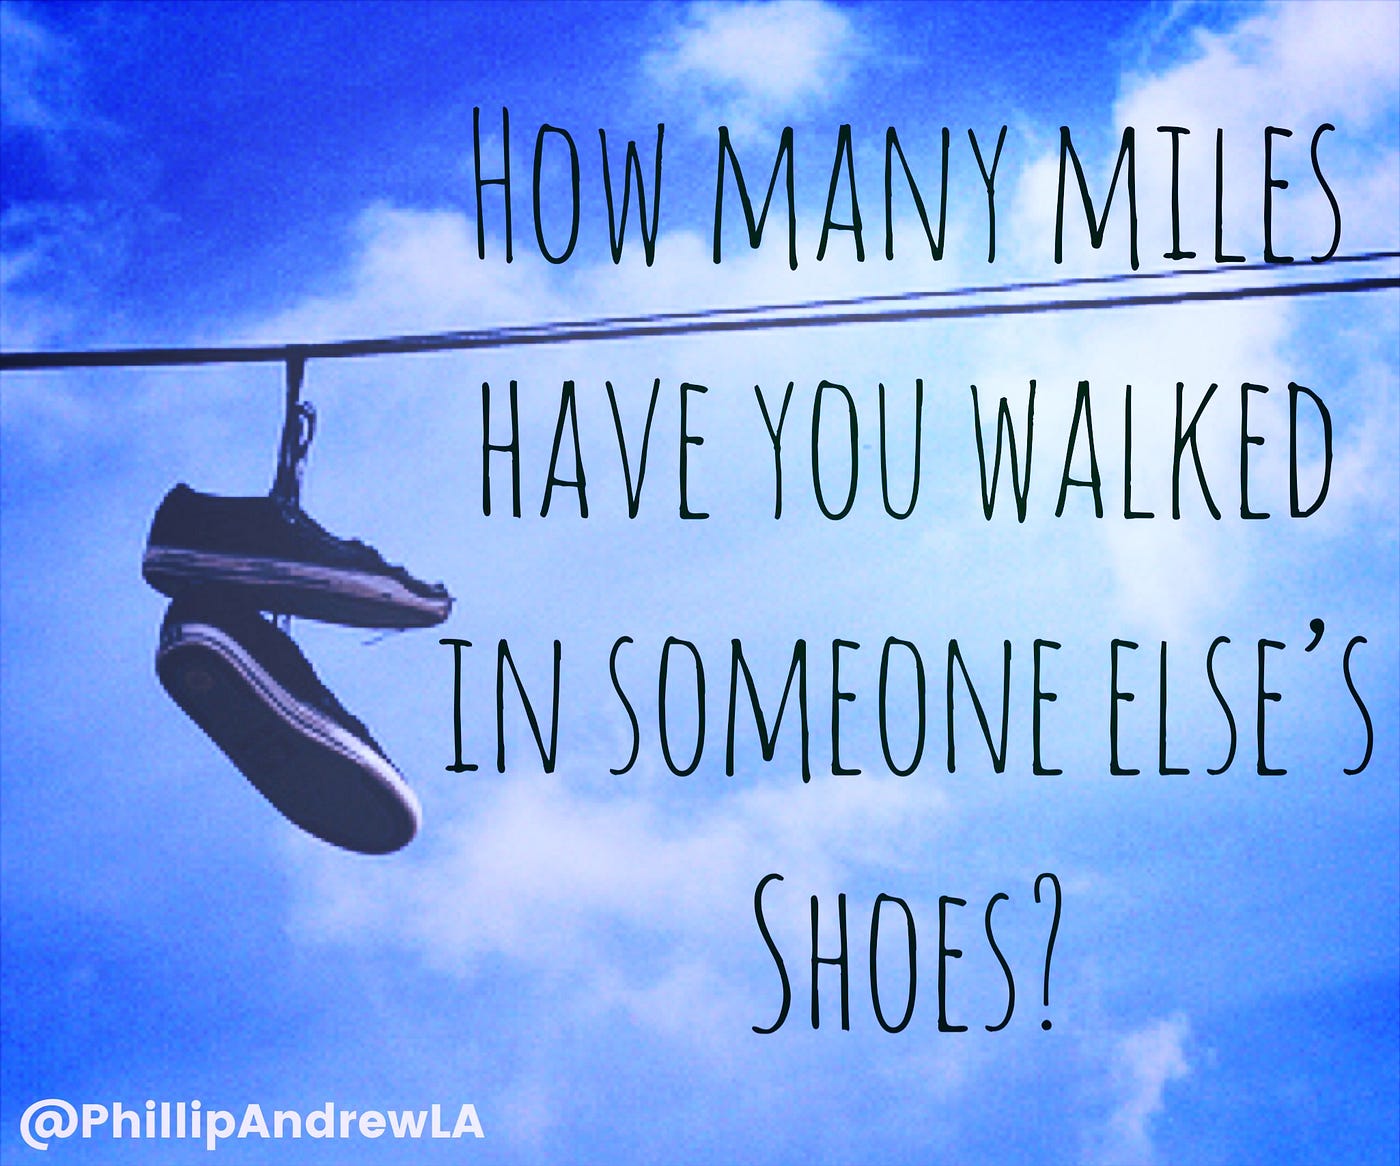 HOW MANY MILES HAVE YOU WALKED IN SOMEONE ELSE'S SHOES? | by Phillip Andrew  | Medium